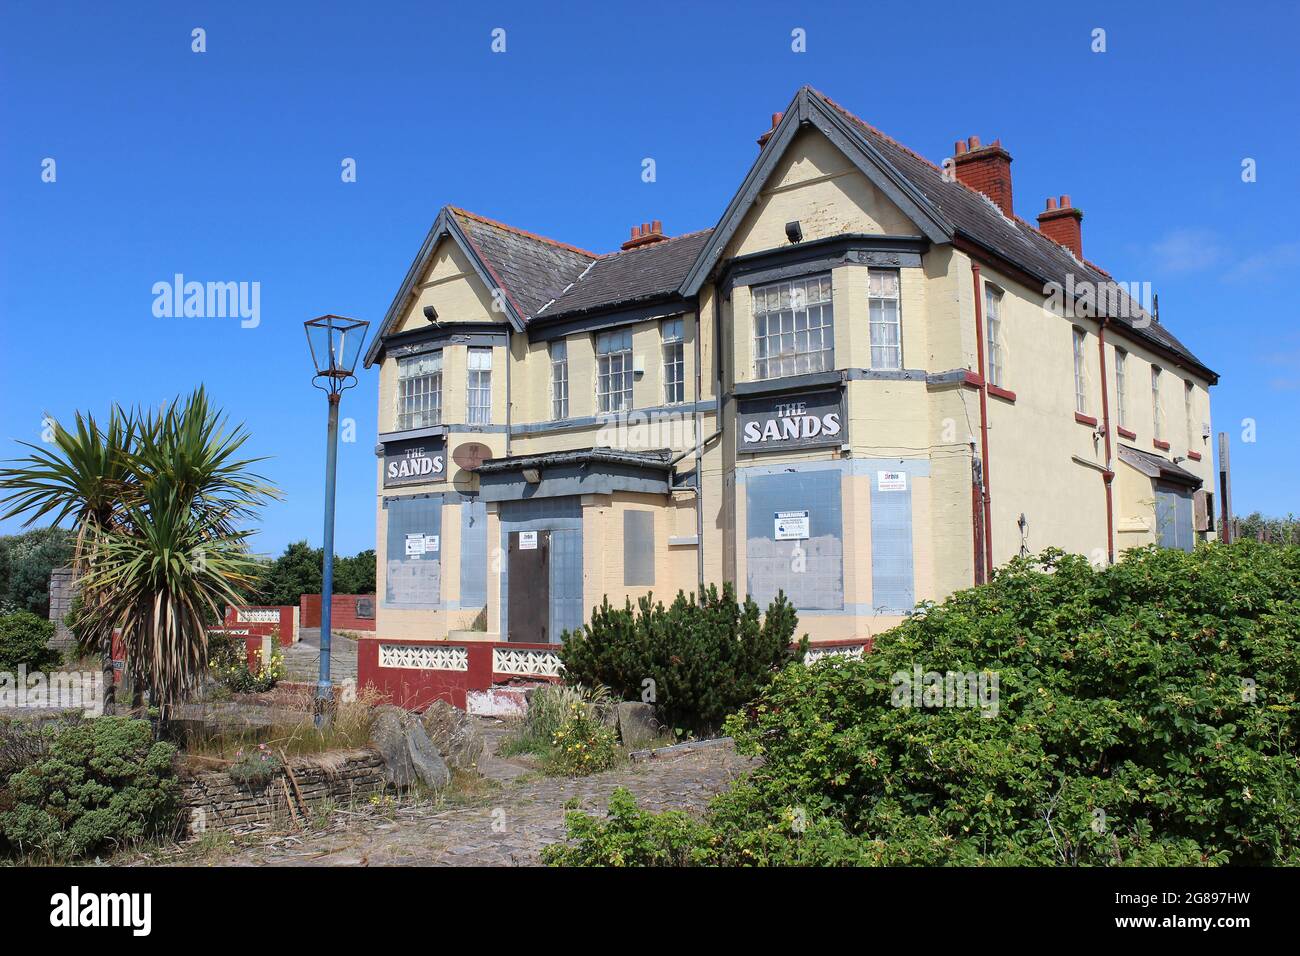 The Sands - Derelict Pub accanto Sands Lake, Ainsdale, Merseyside Foto Stock